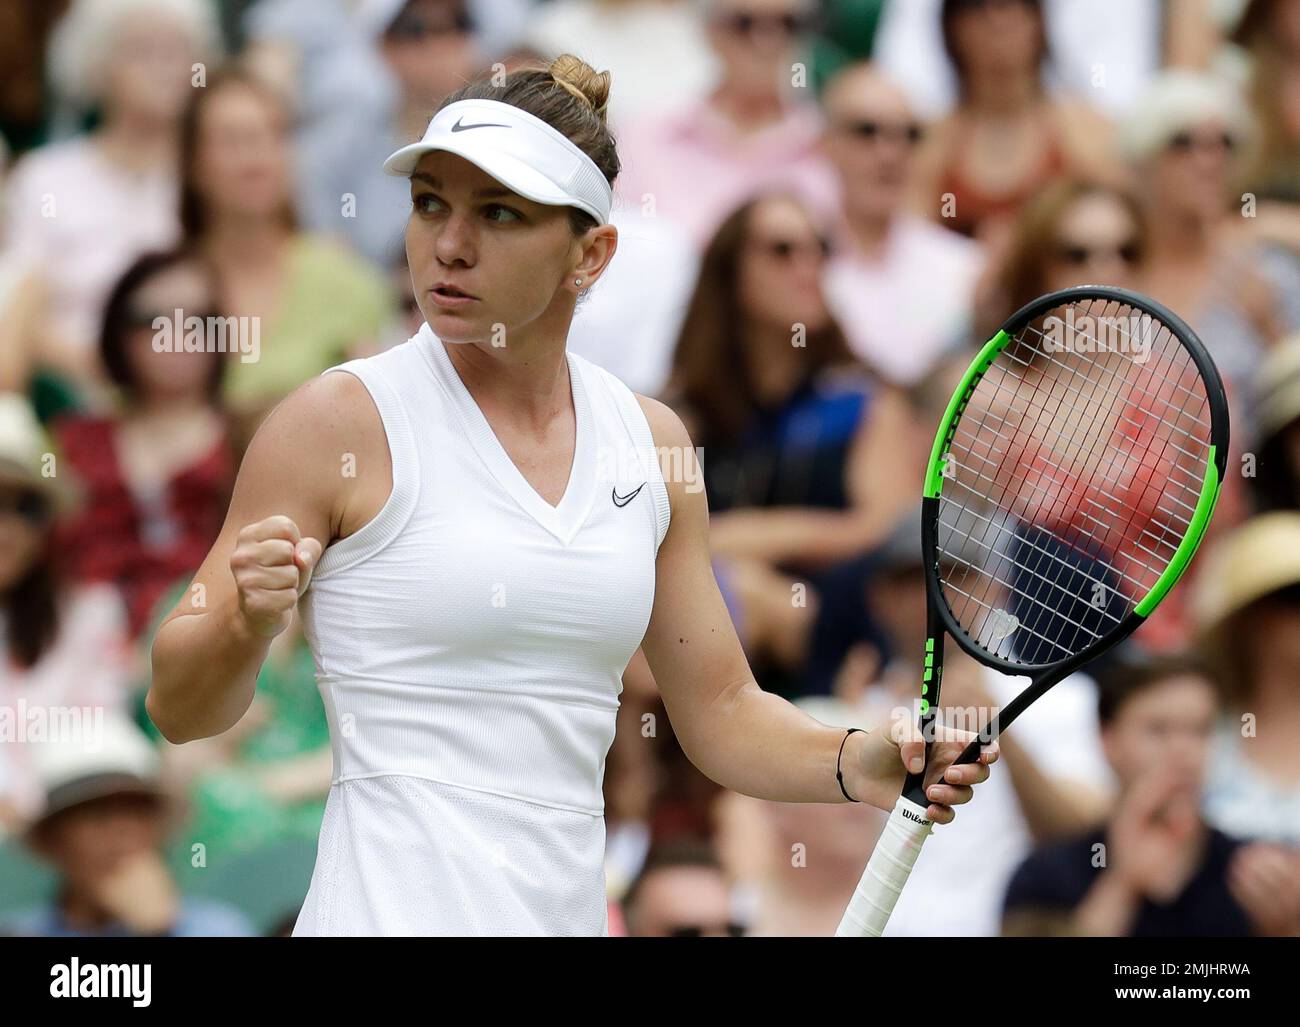 Romanias Simona Halep celebrates after winning a point against United States Serena Williams during the womens singles final match on day twelve of the Wimbledon Tennis Championships in London, Saturday, July 13,